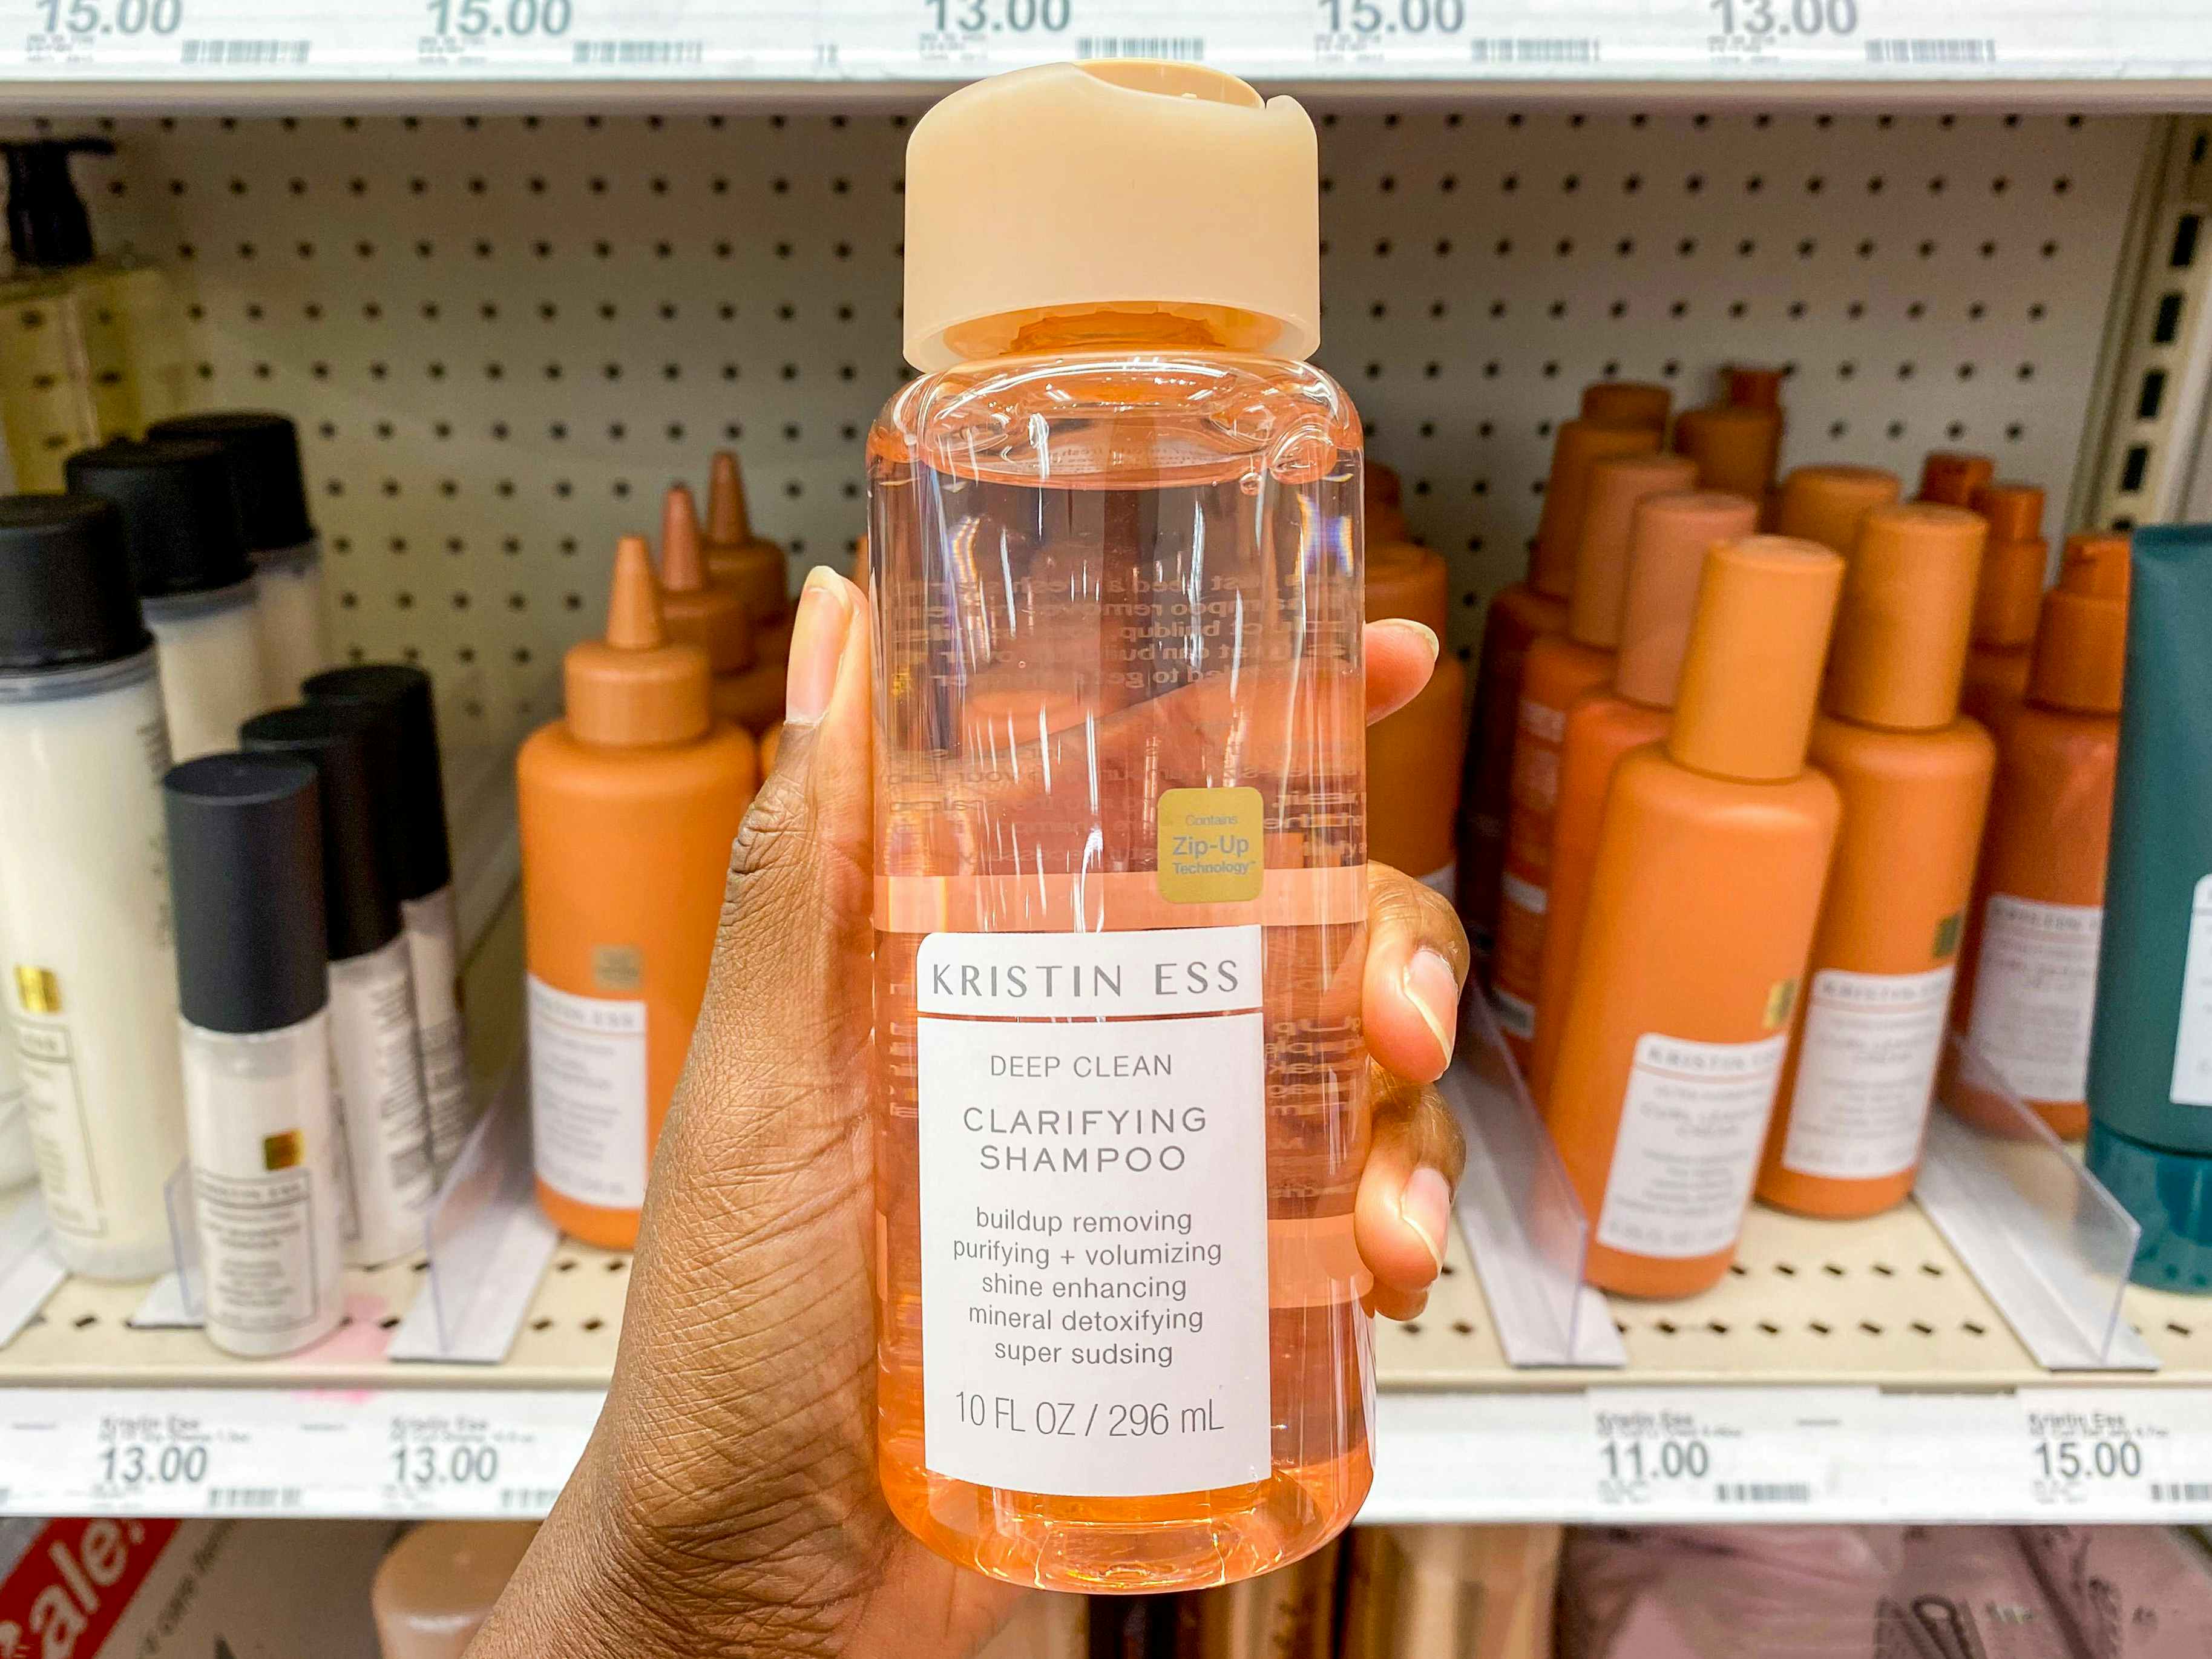 A person's hand holding a bottle of Kristin Ess Deep Clean Clarifying Shampoo in the haircare aisle at Target.